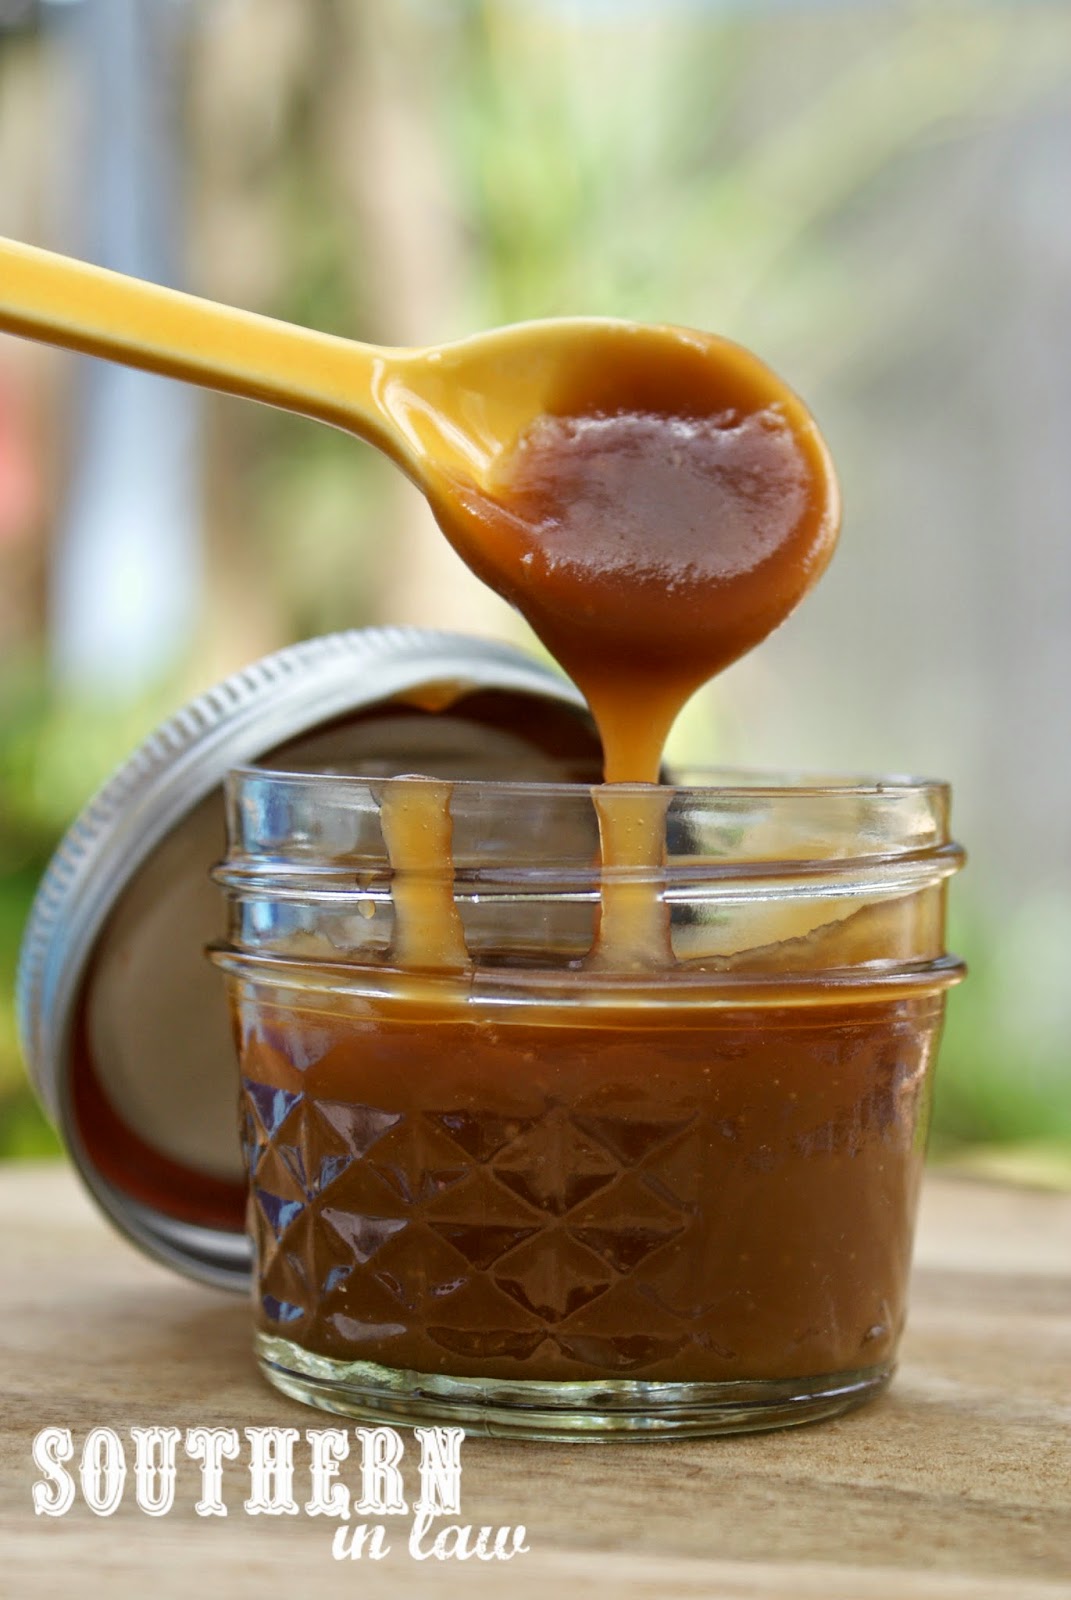 Three Ingredient Healthy Caramel Sauce - Low fat, gluten free, clean eating friendly, refined sugar free, vegan, dairy free and guilt free!